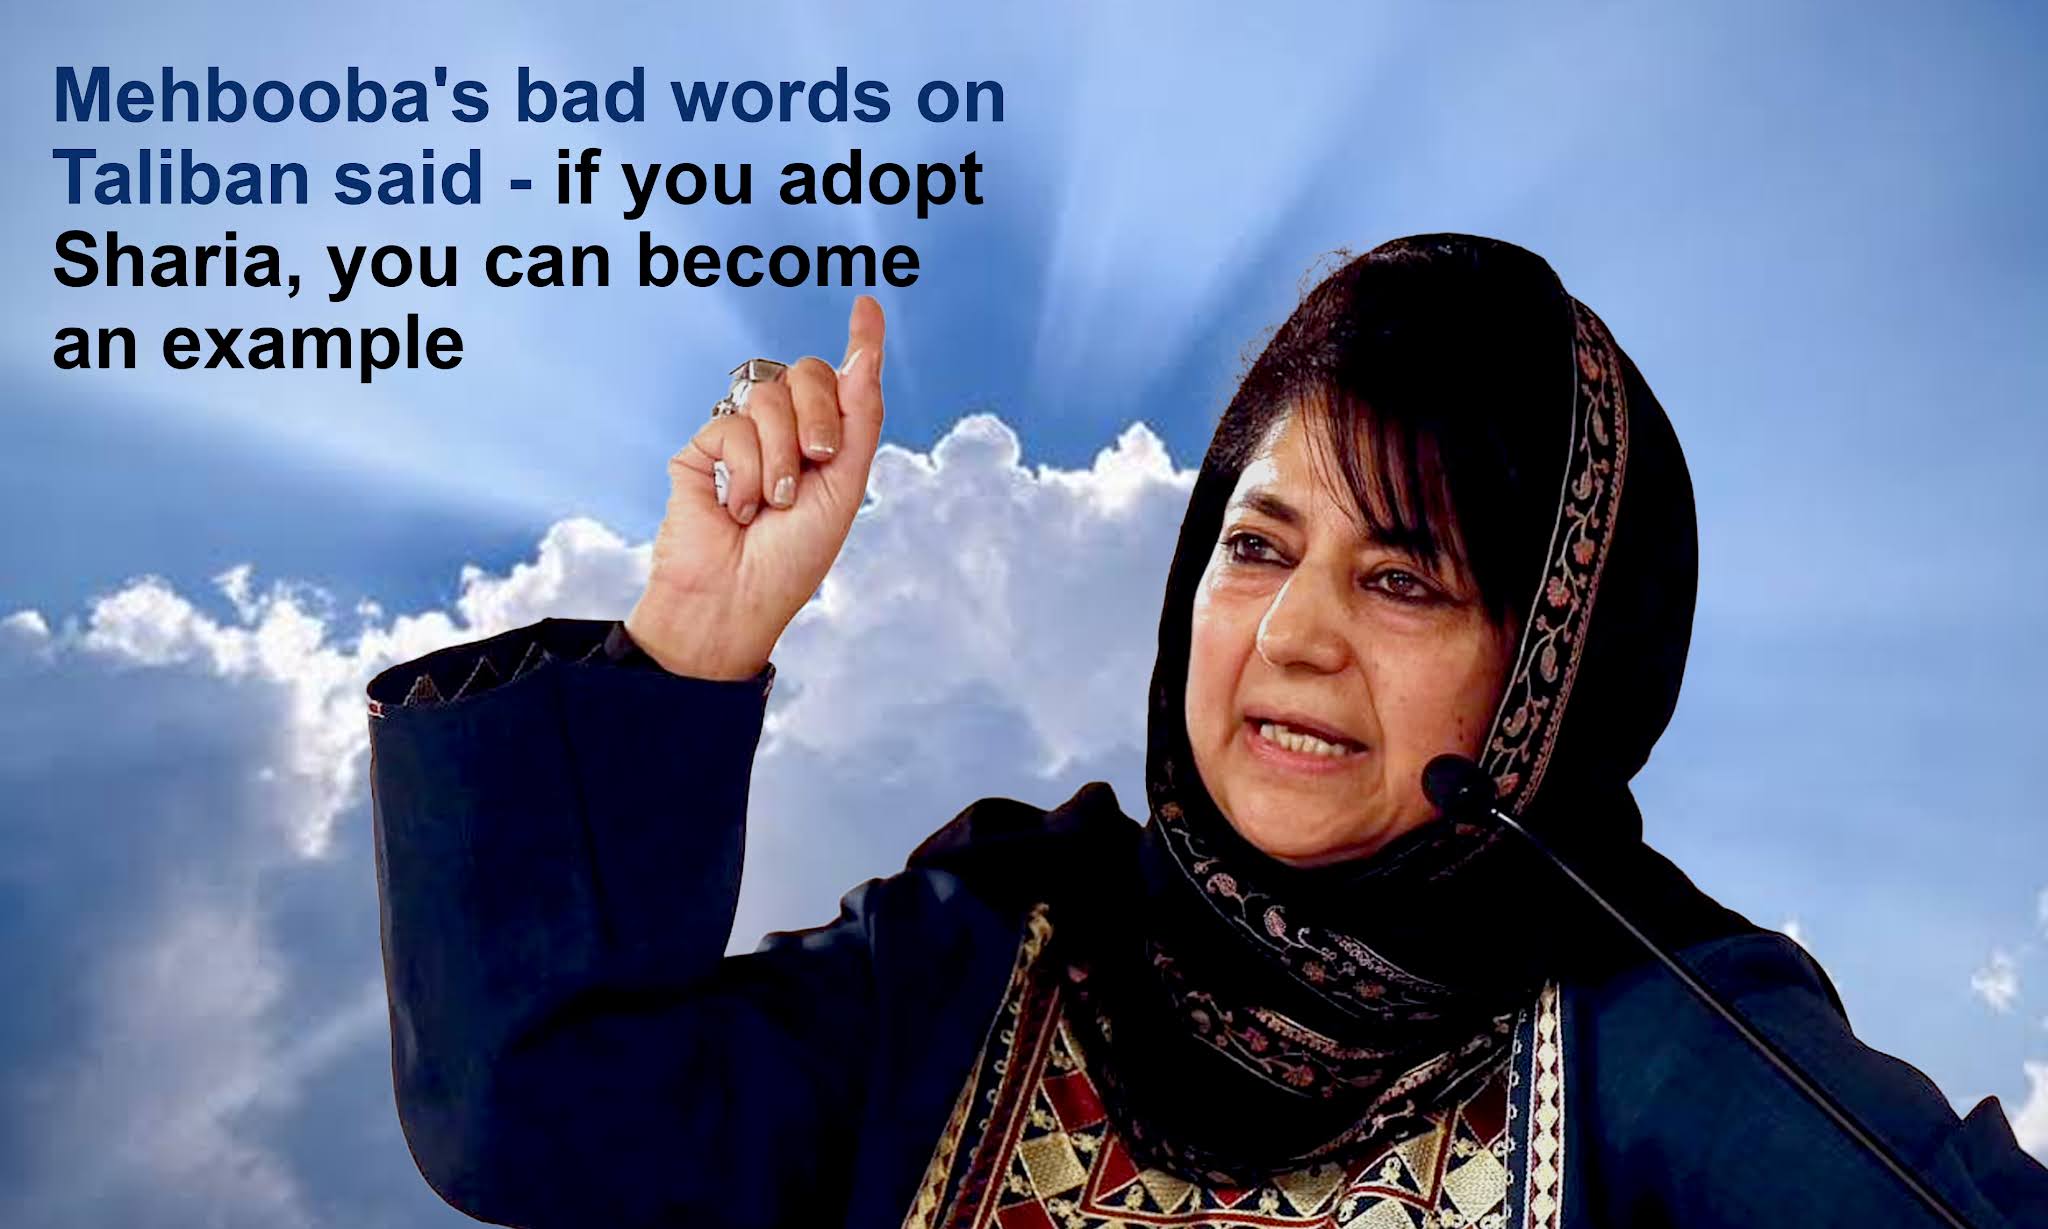 Mehbooba�s Bad Words on Taliban Said - If You Adopt Sharia, You Can Become an Example